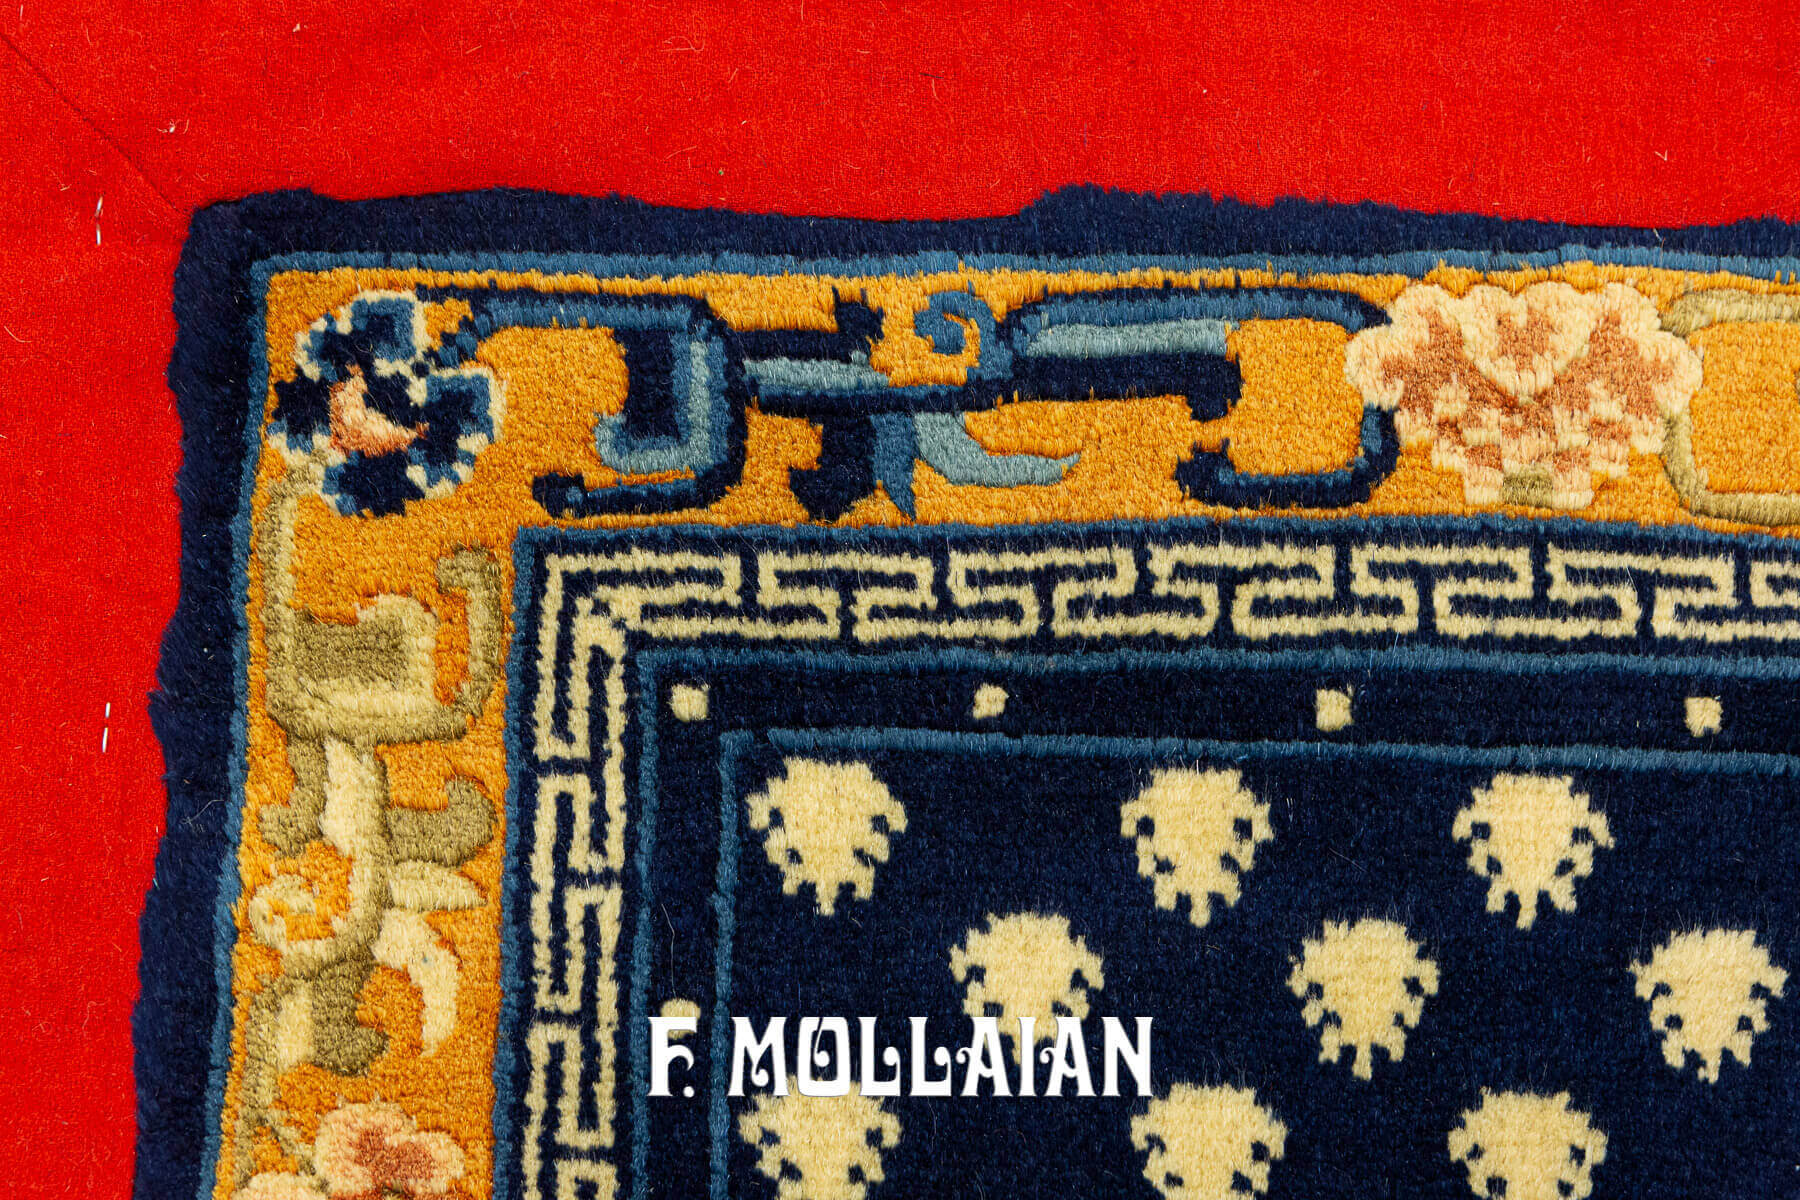 Small decorative Hand-knotted Antique Tibetan Rug n°:97003151